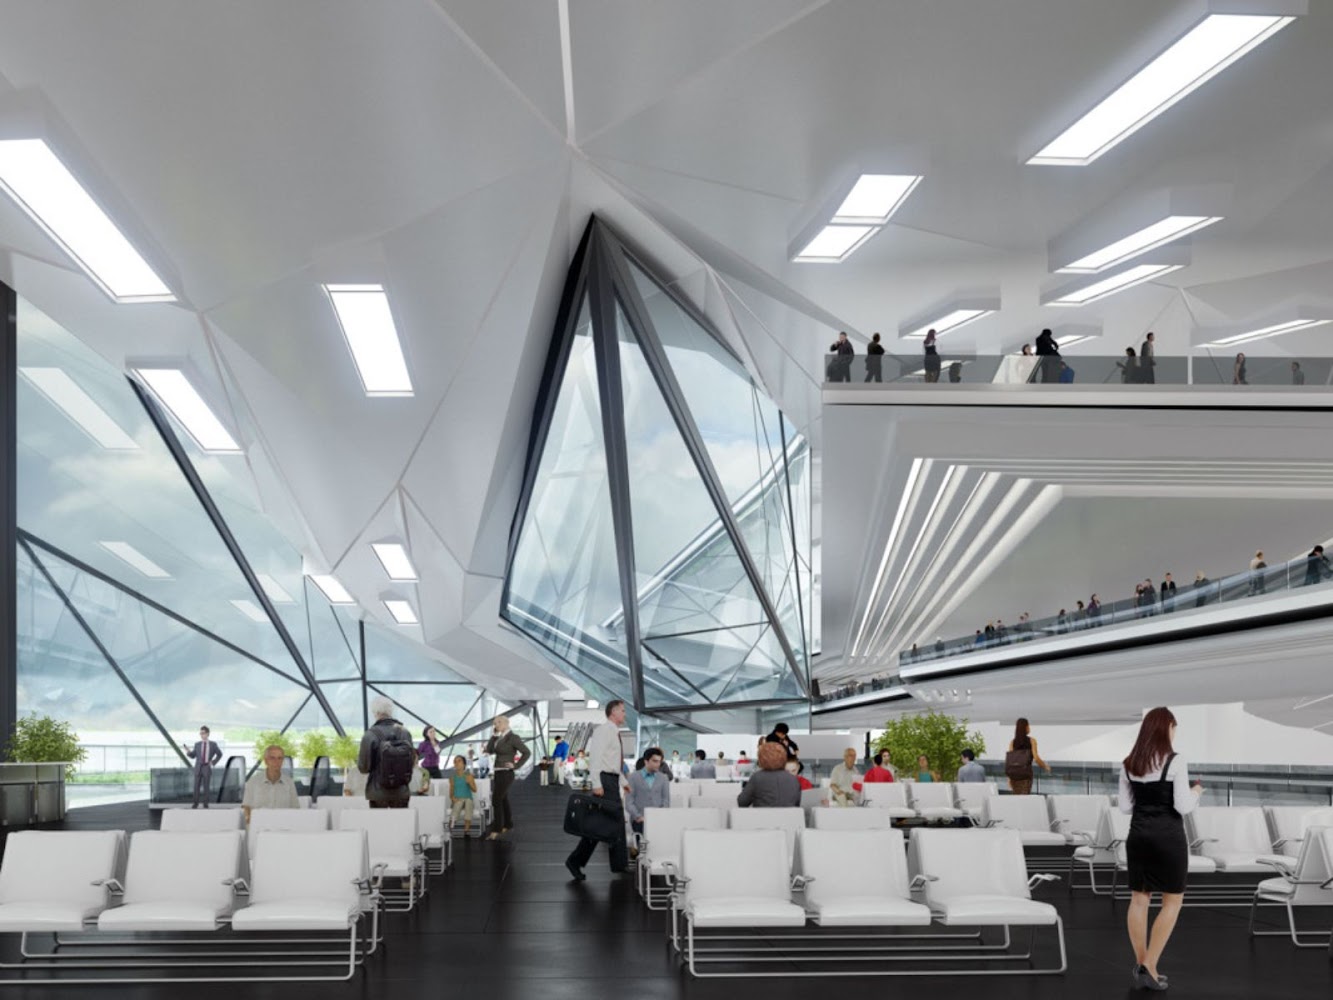 Passenger Service Center by Urban Office Architecture